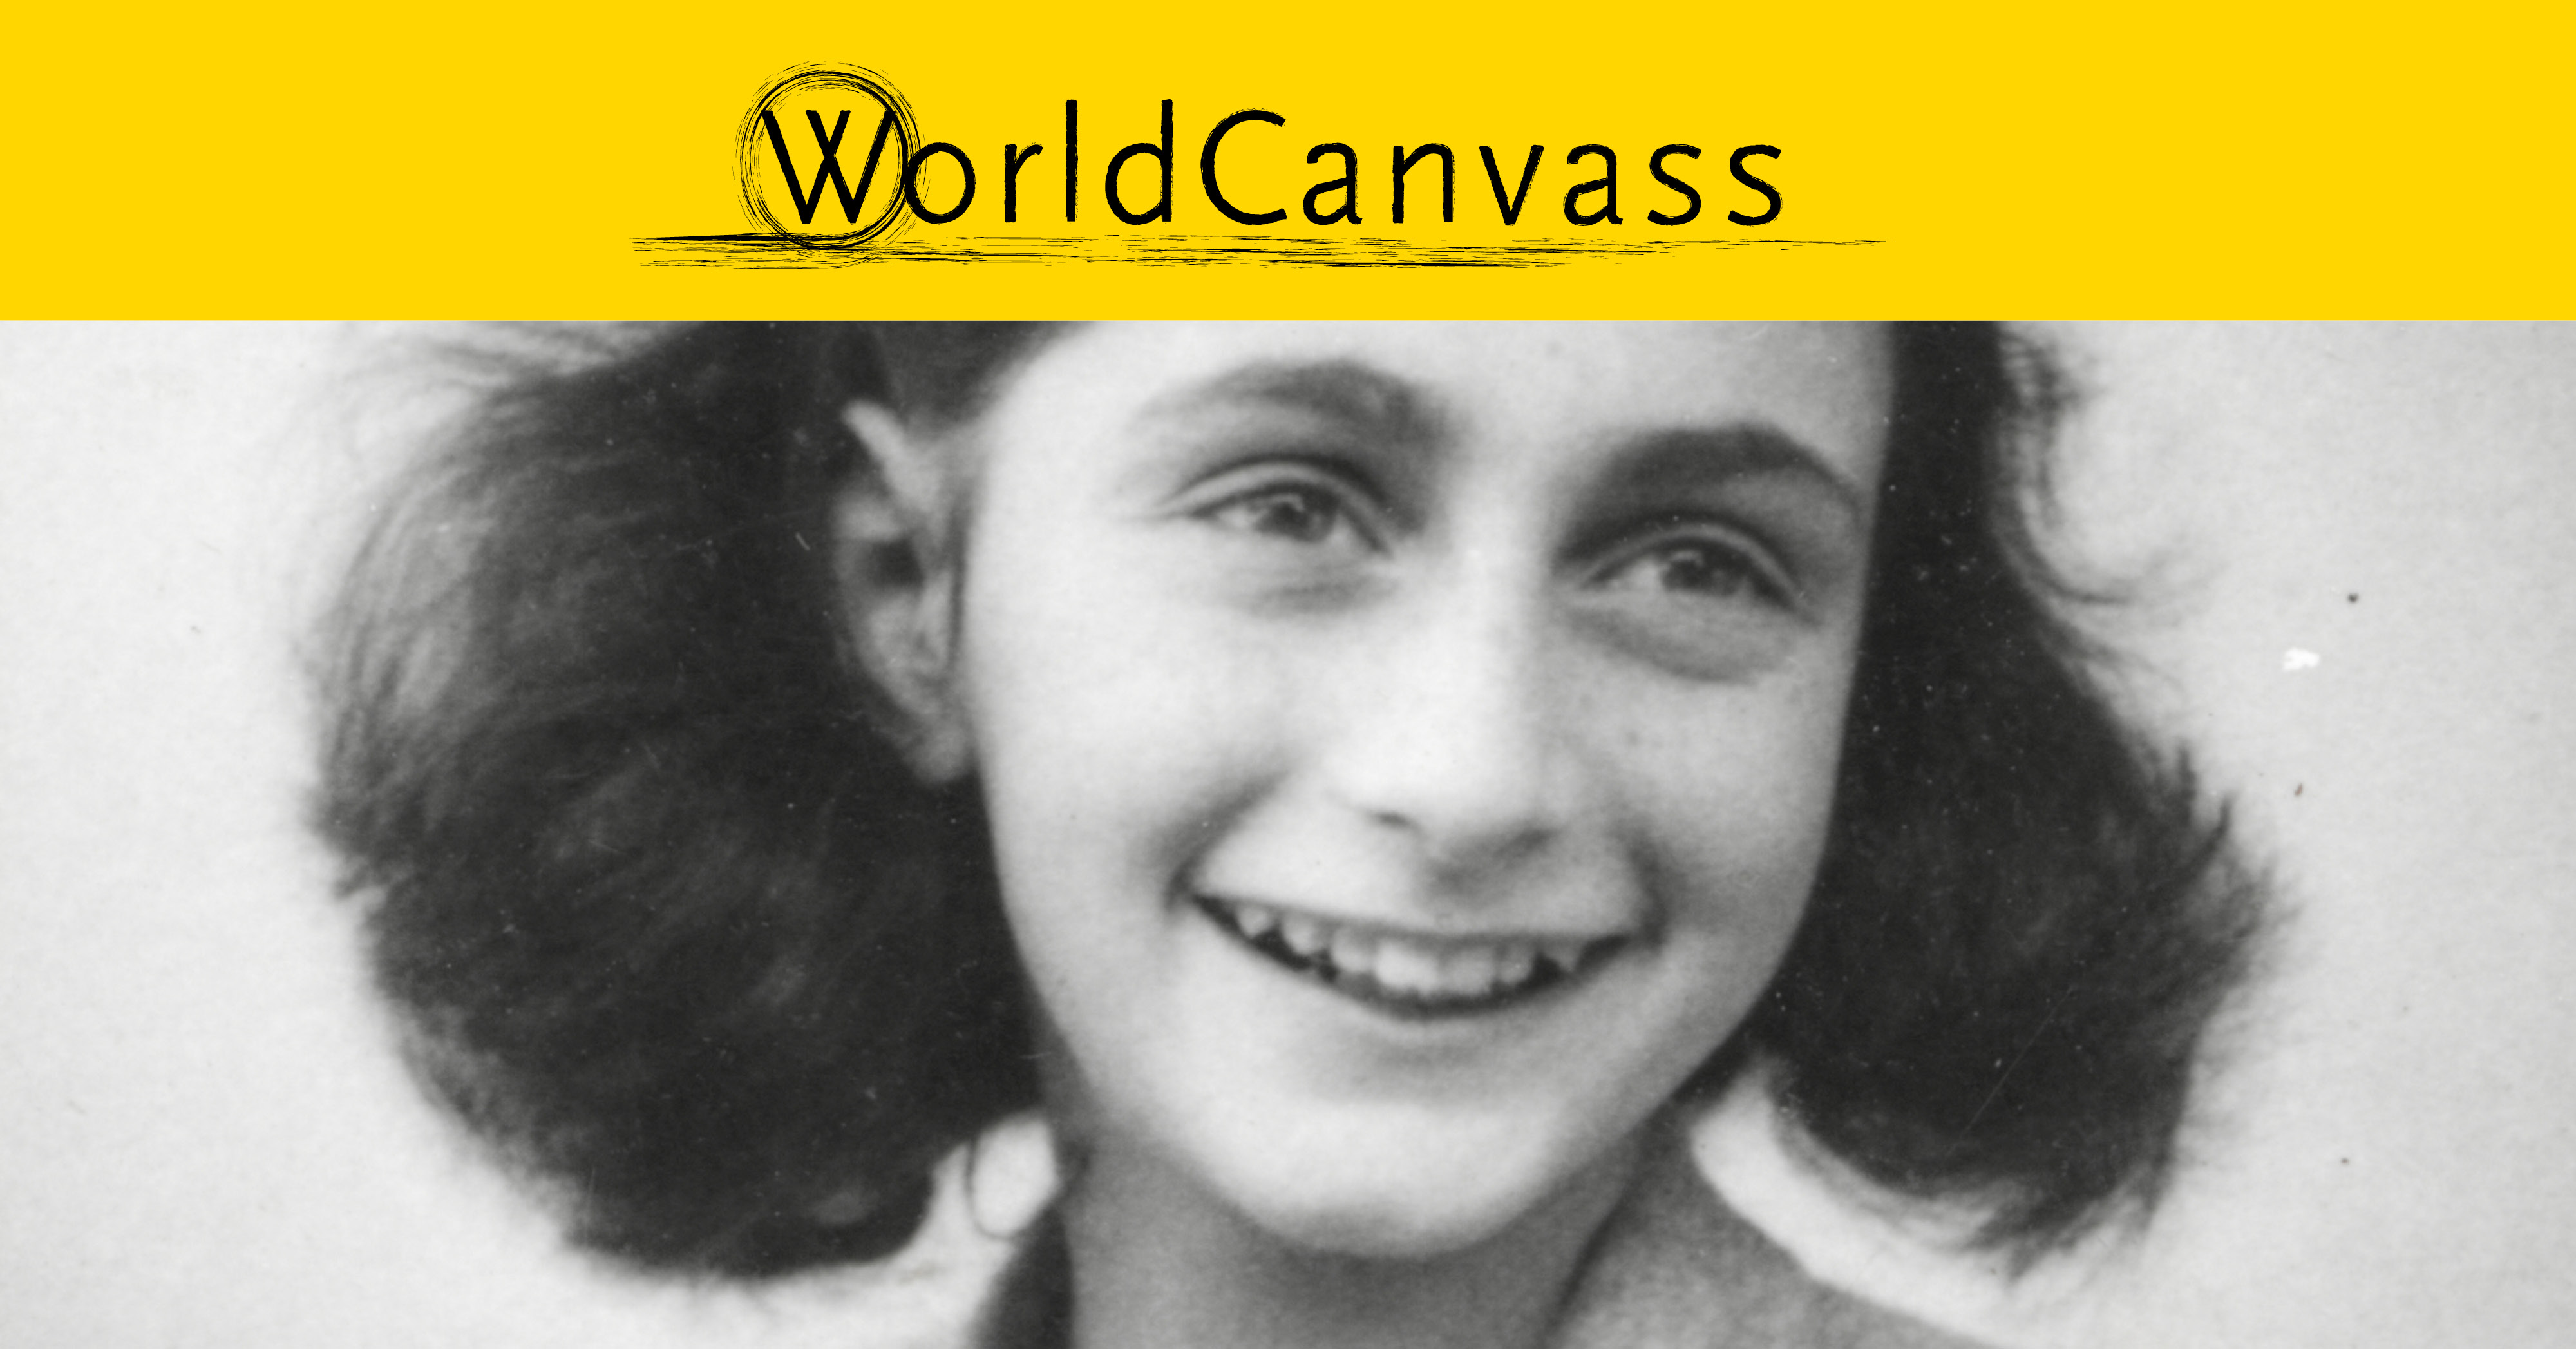 WorldCanvass and picture of Anne Frank smiling